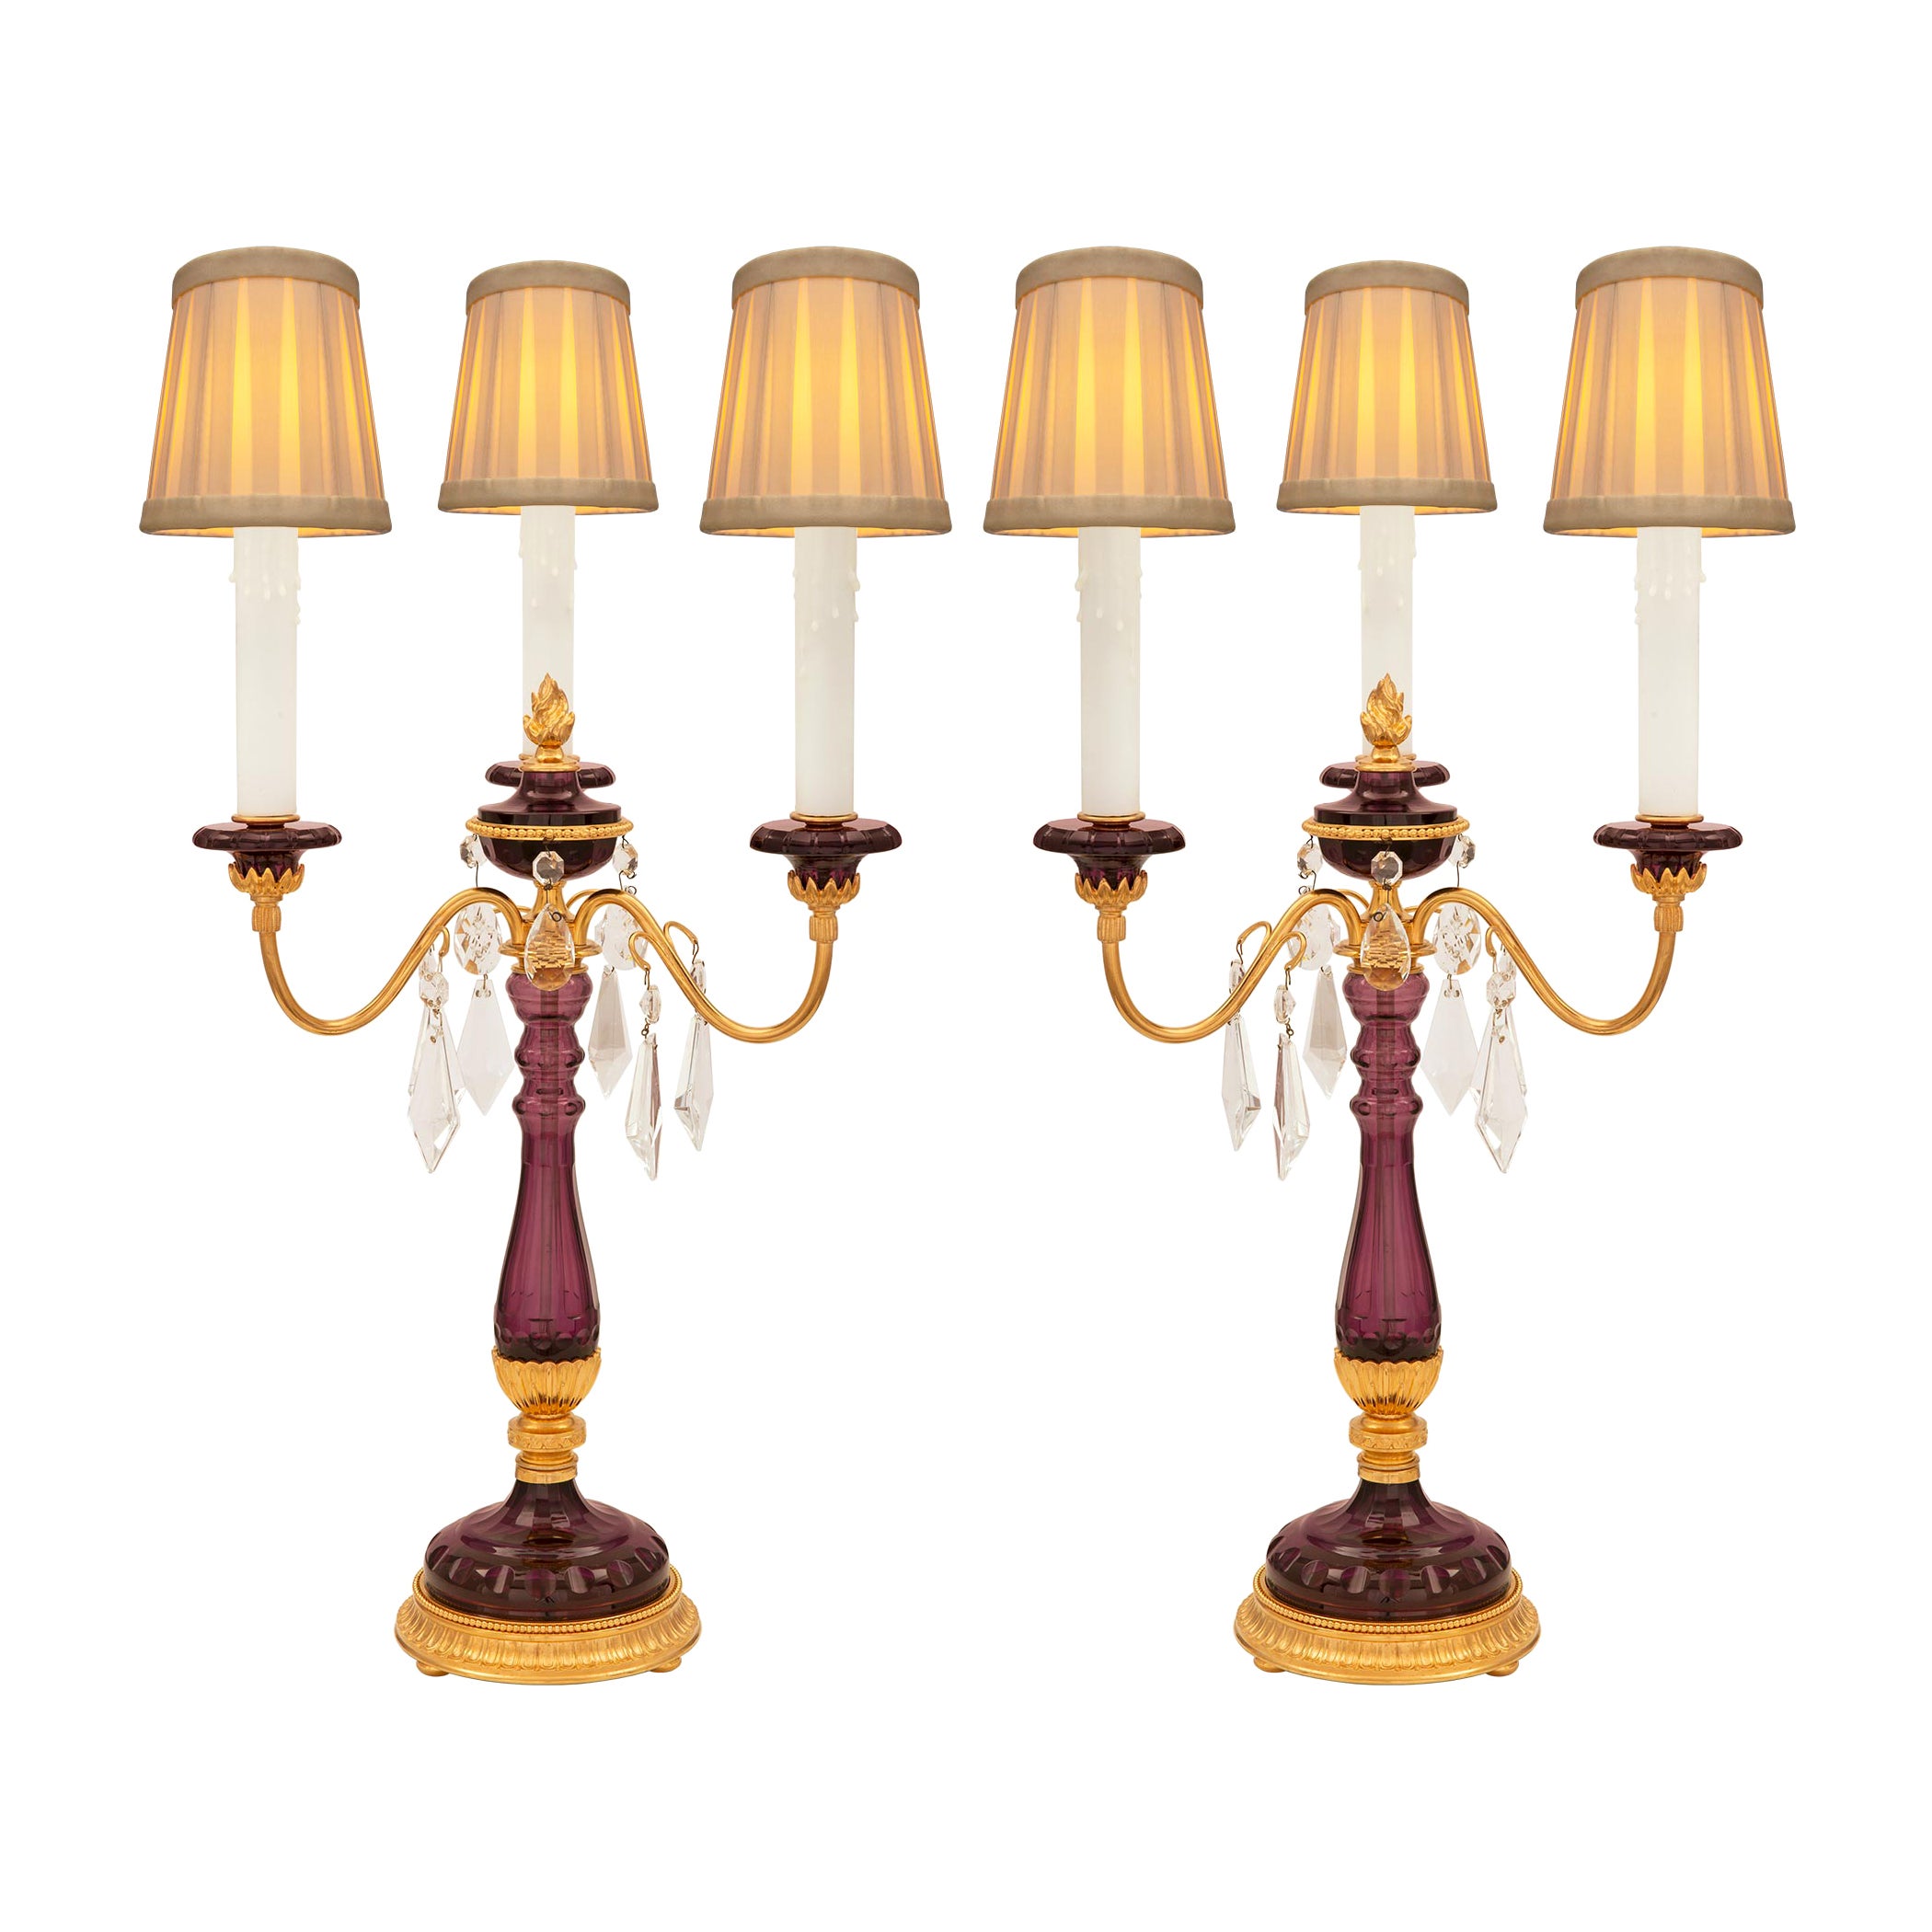 Pair of French Turn of the Century Louis XVI St. Amethyst Colored Glass Lamps